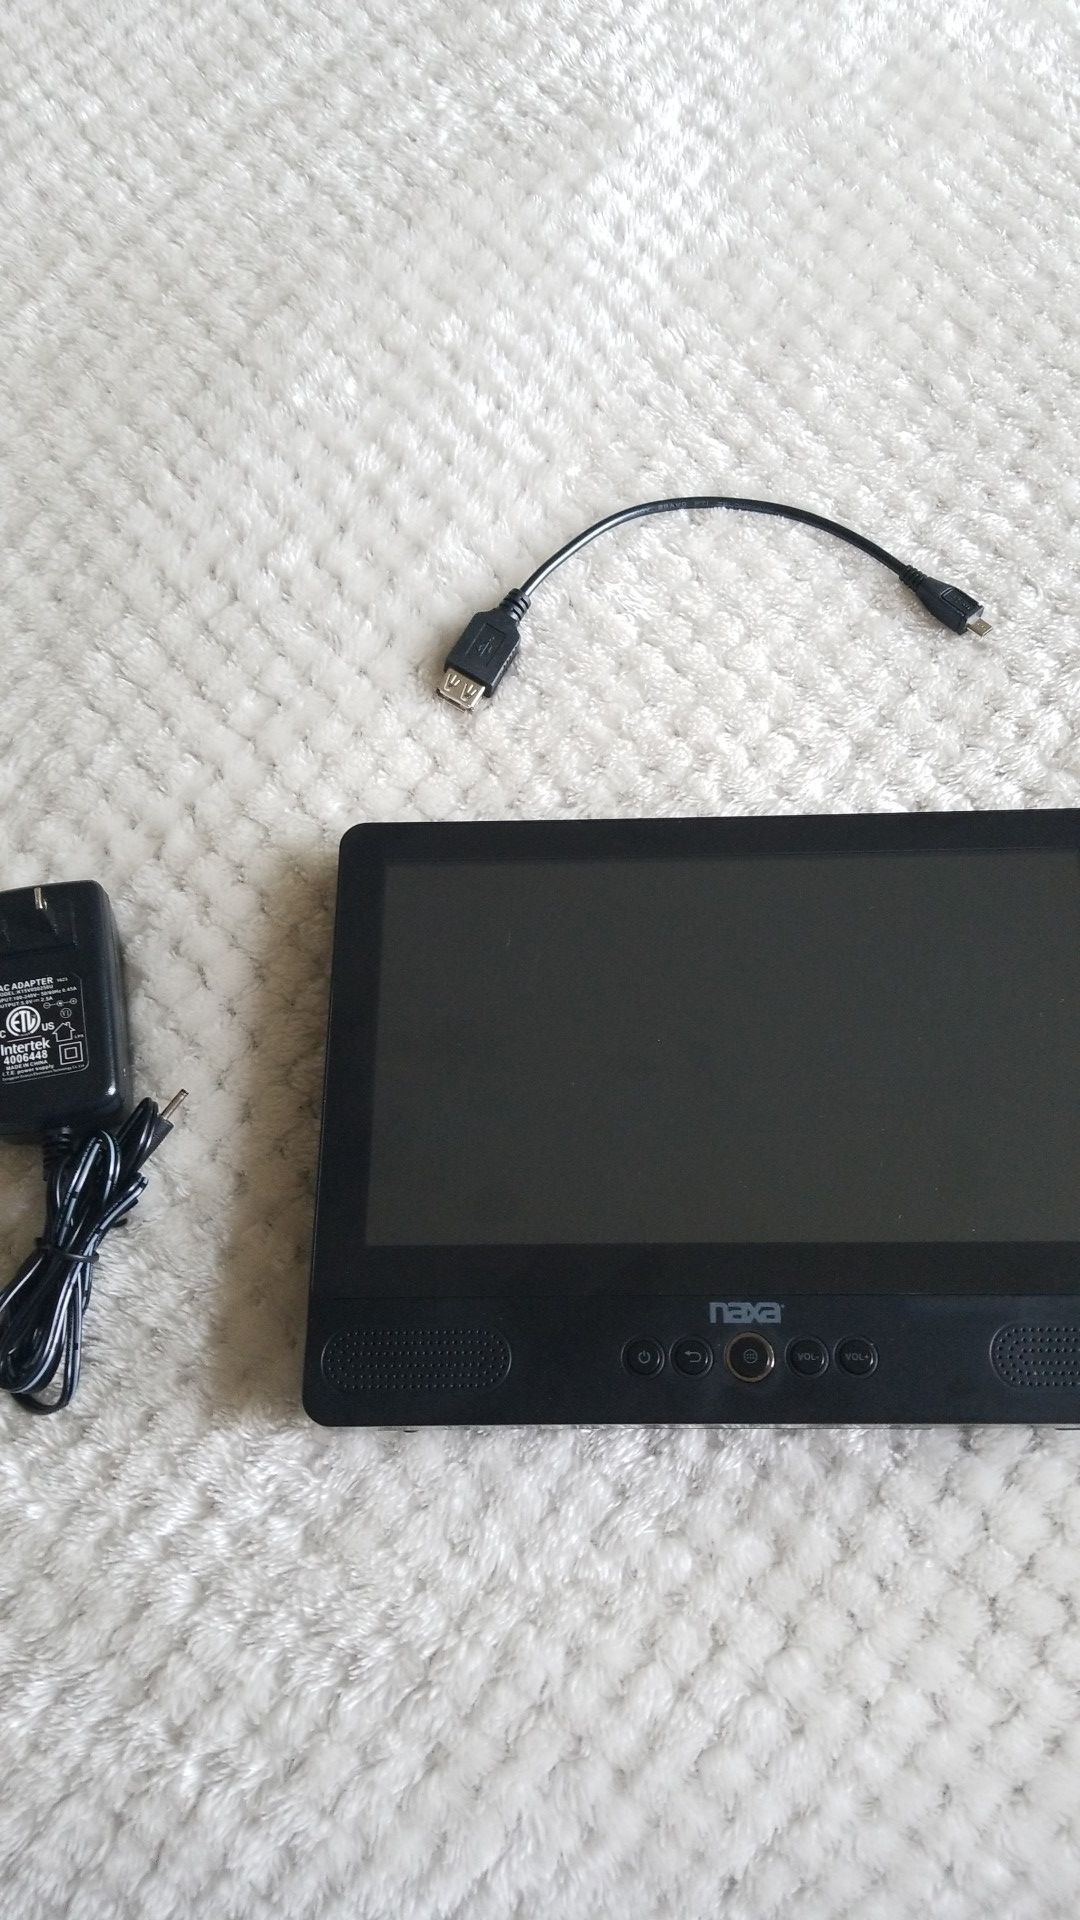 9" core tablet with dvd player.